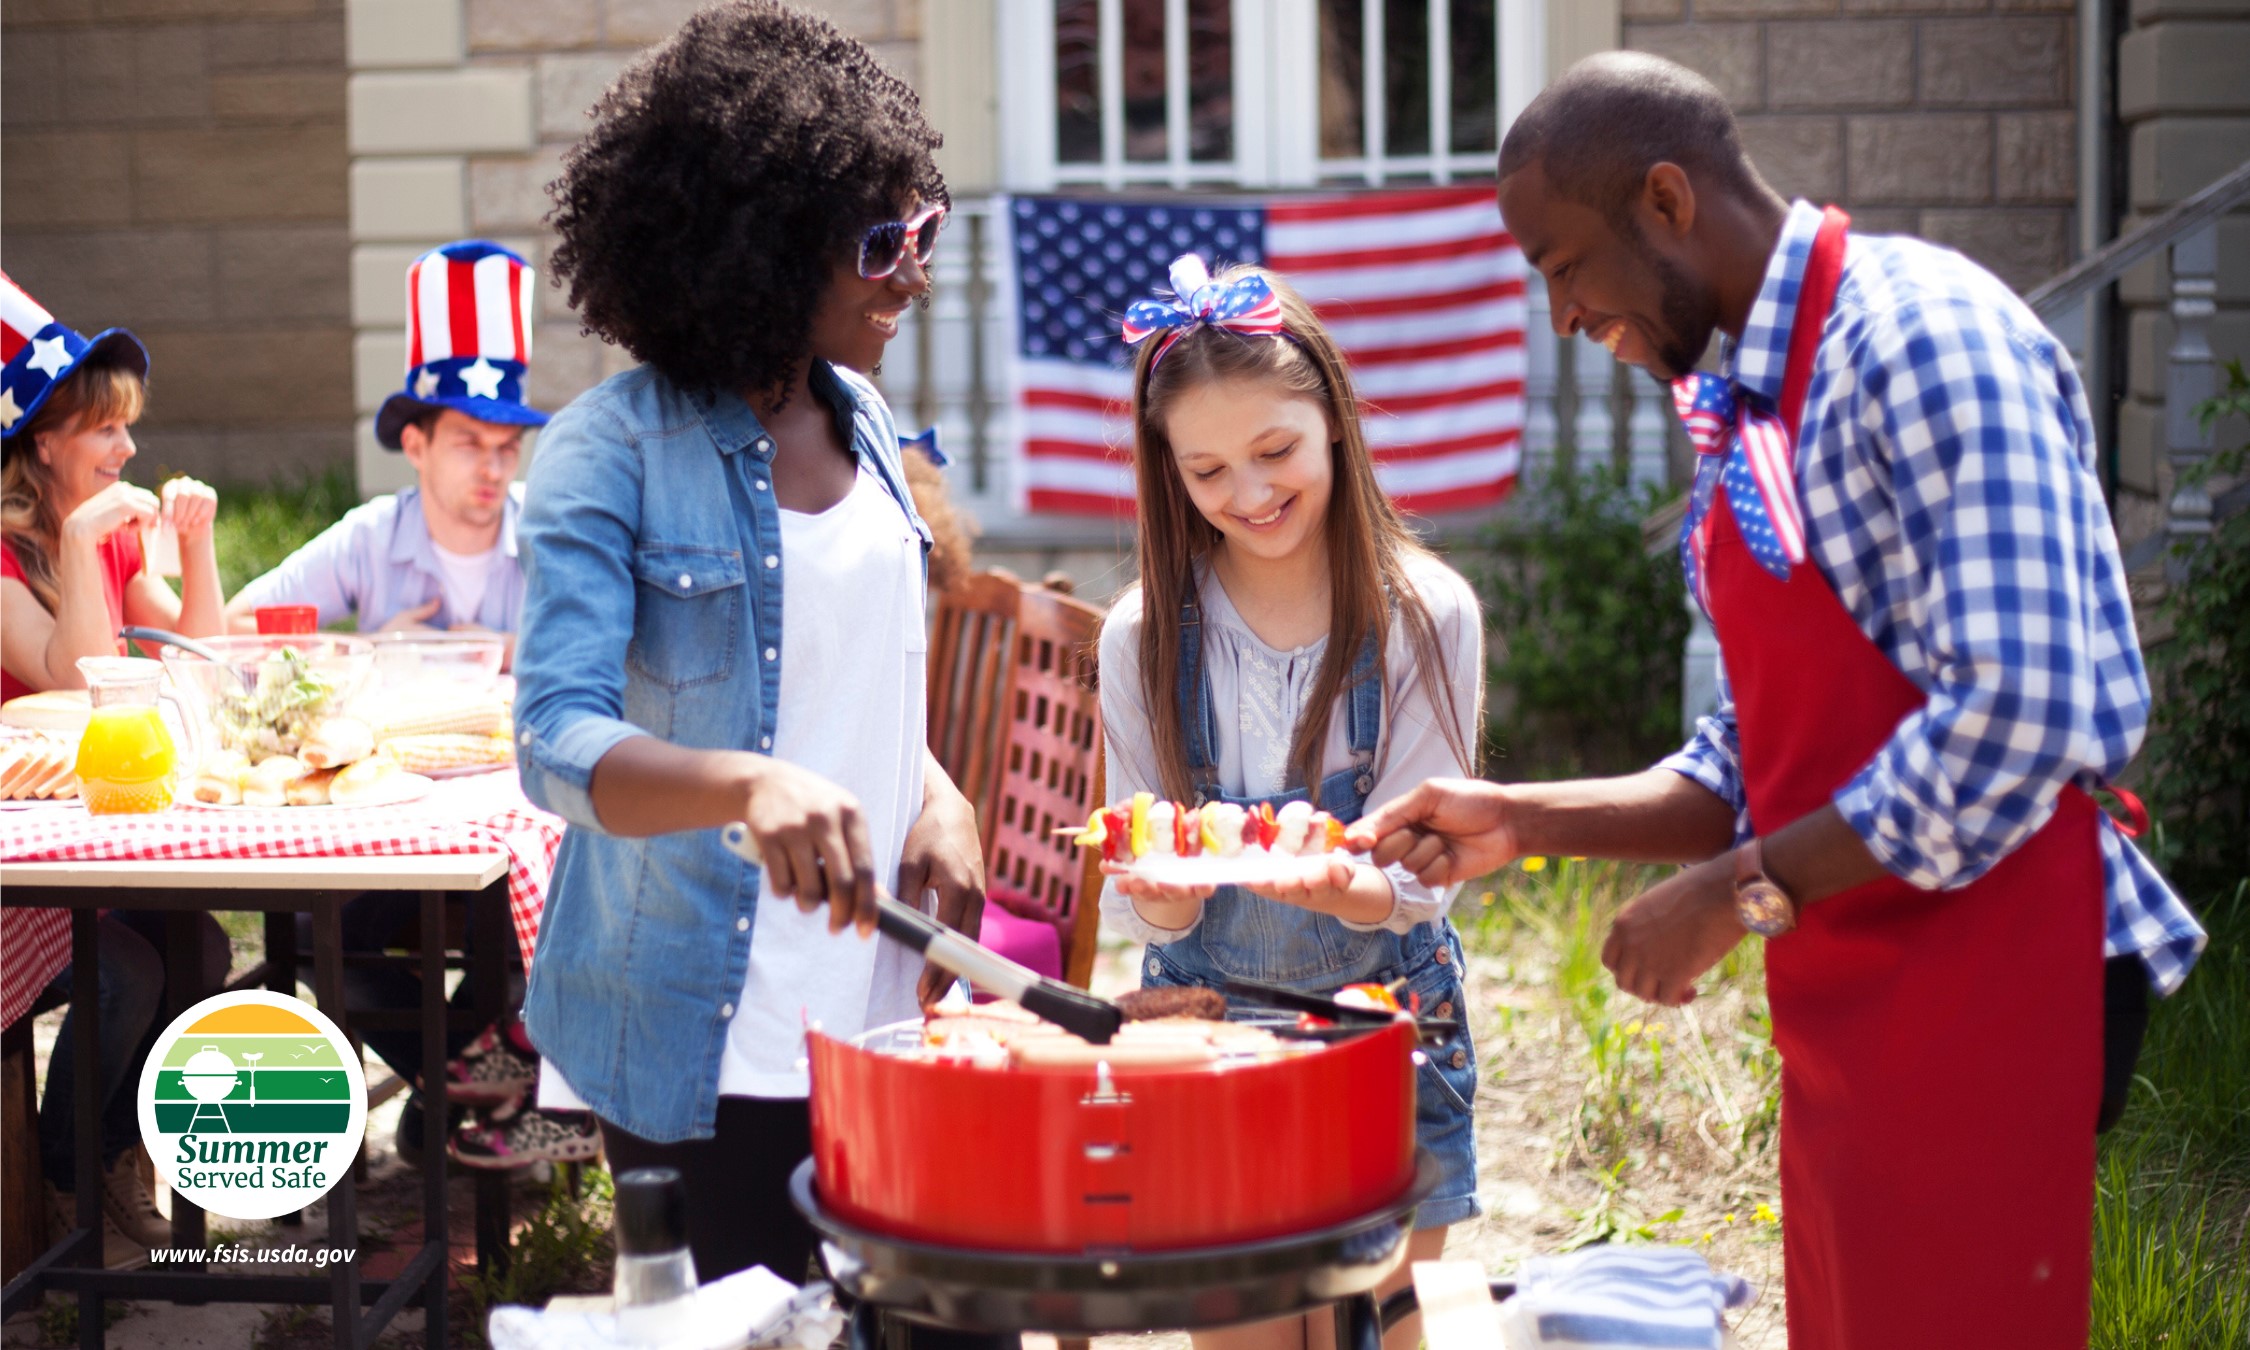 IMAGE: Star-Spangled Grilling and Smoking Food Safety Practices Everyone Needs to Know